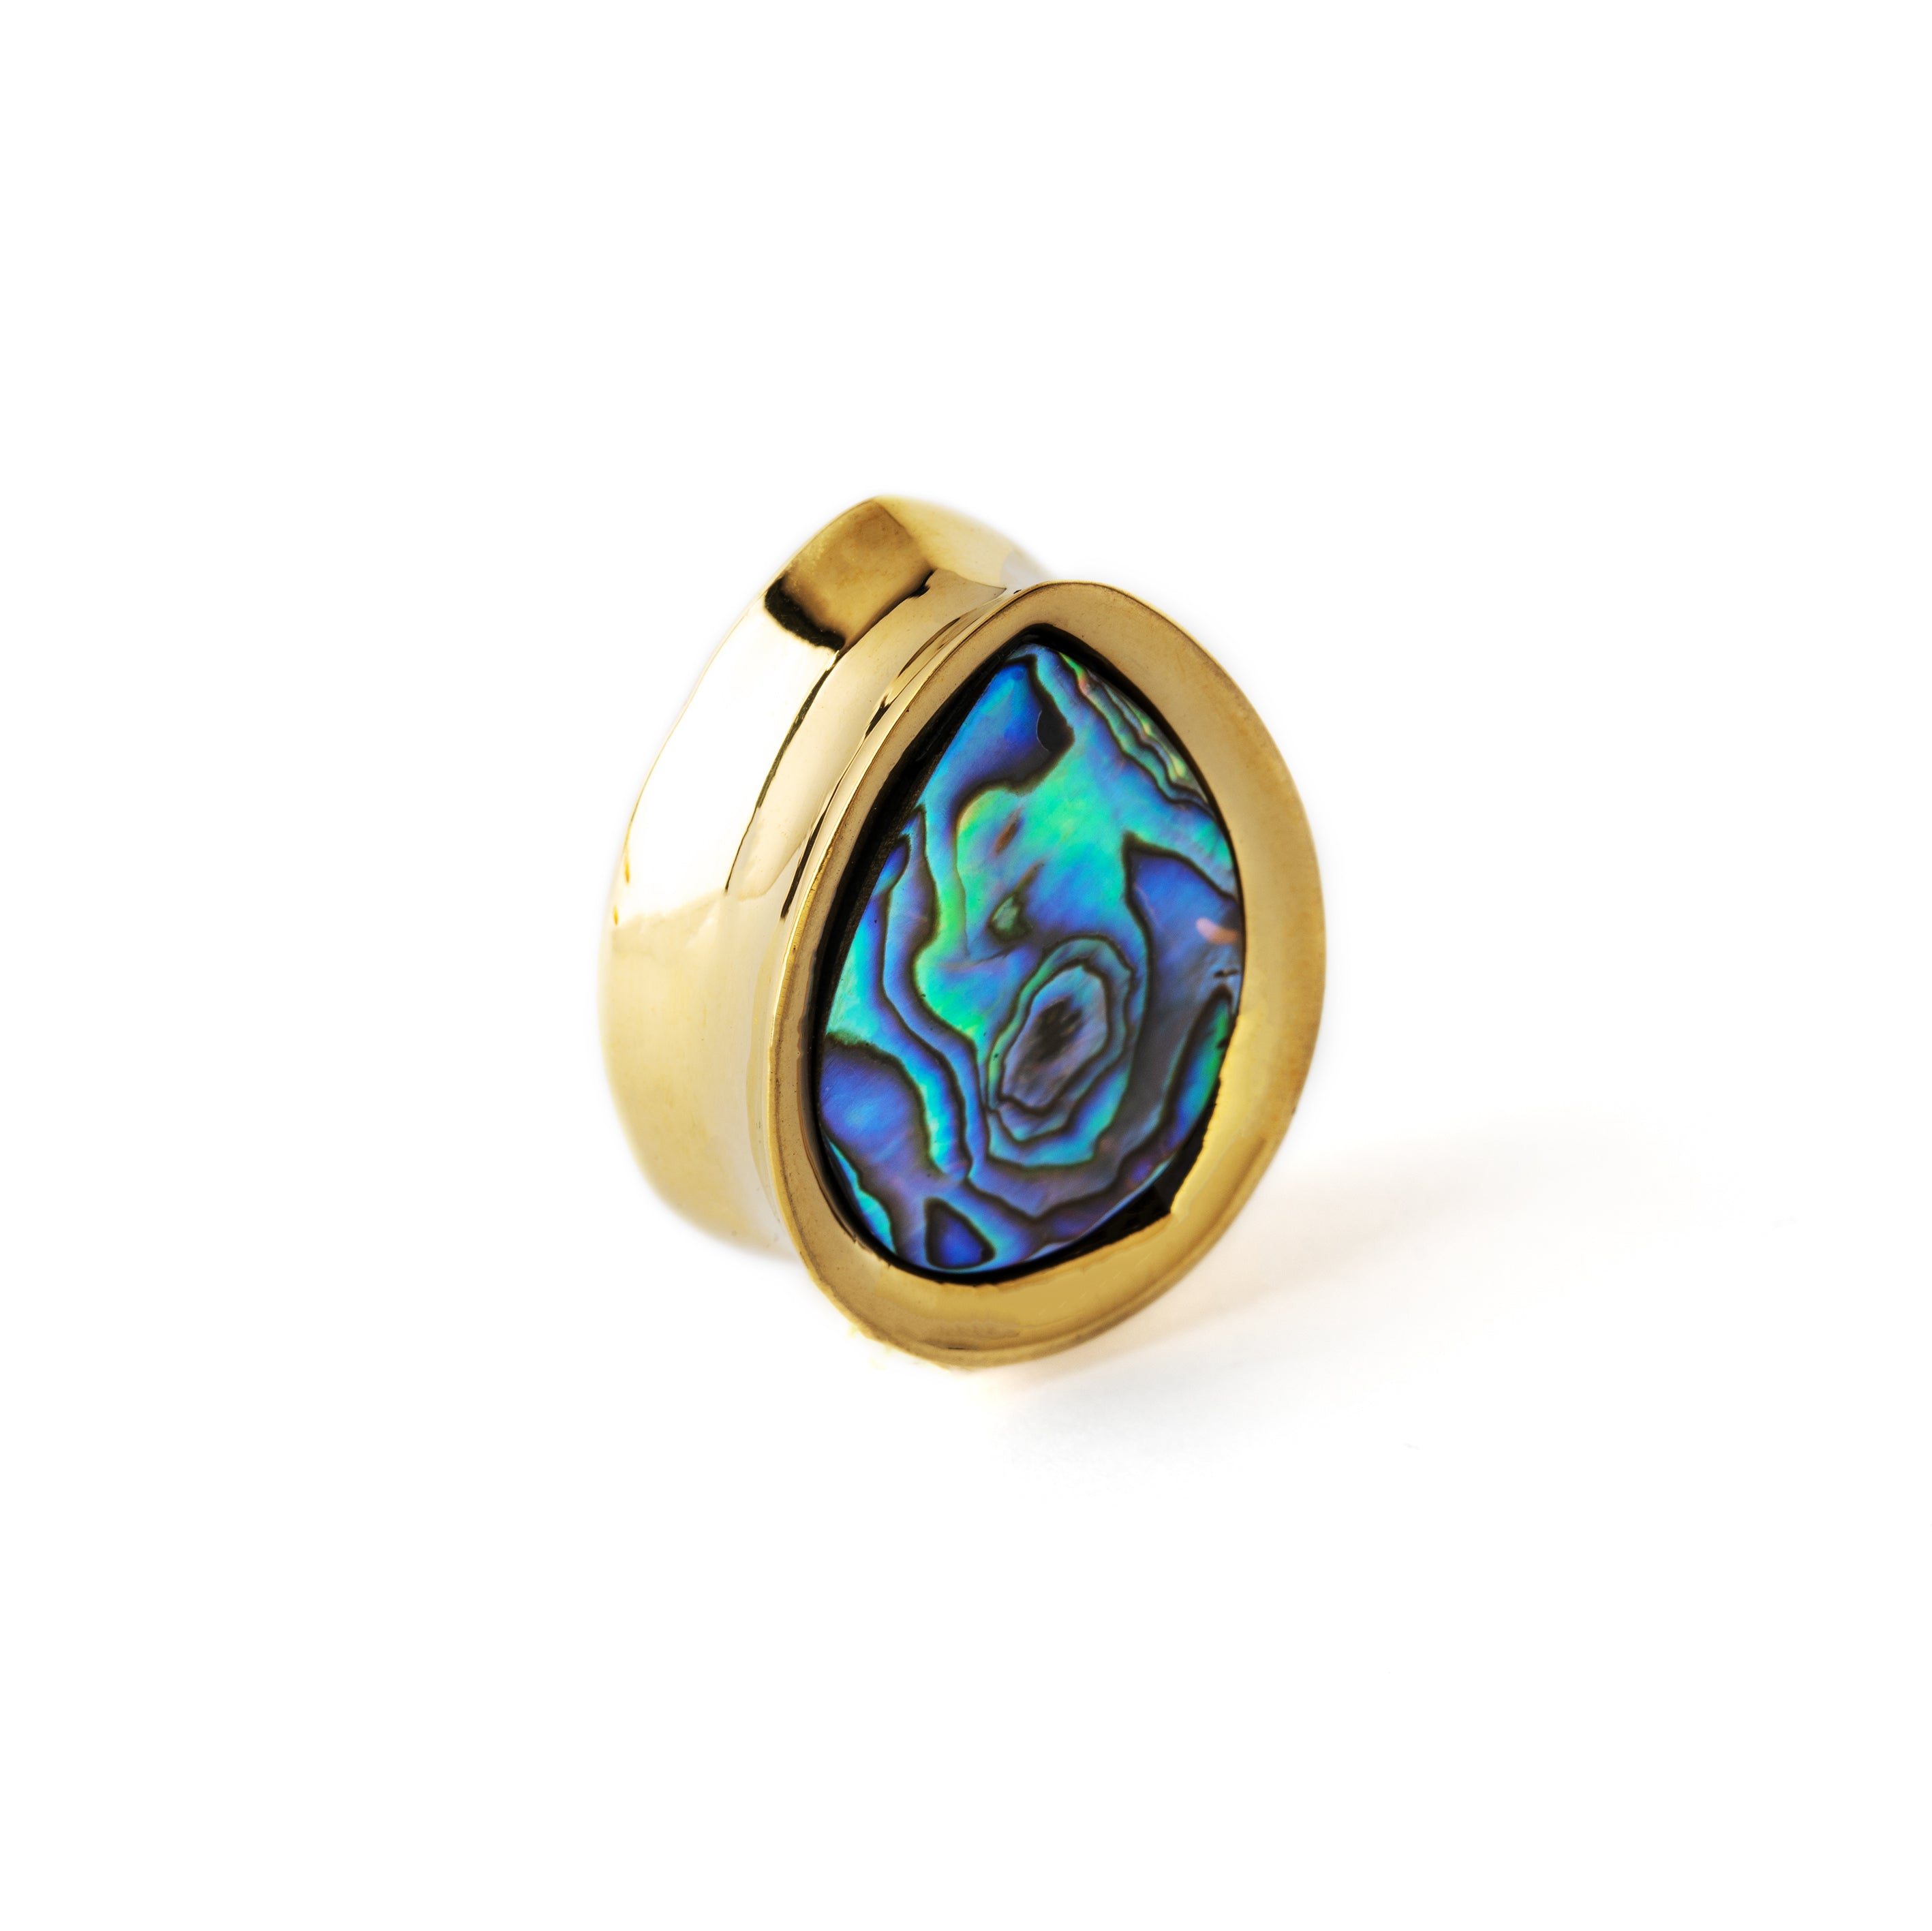 golden teardrop shaped plug earring with abalone shell inlay right side view